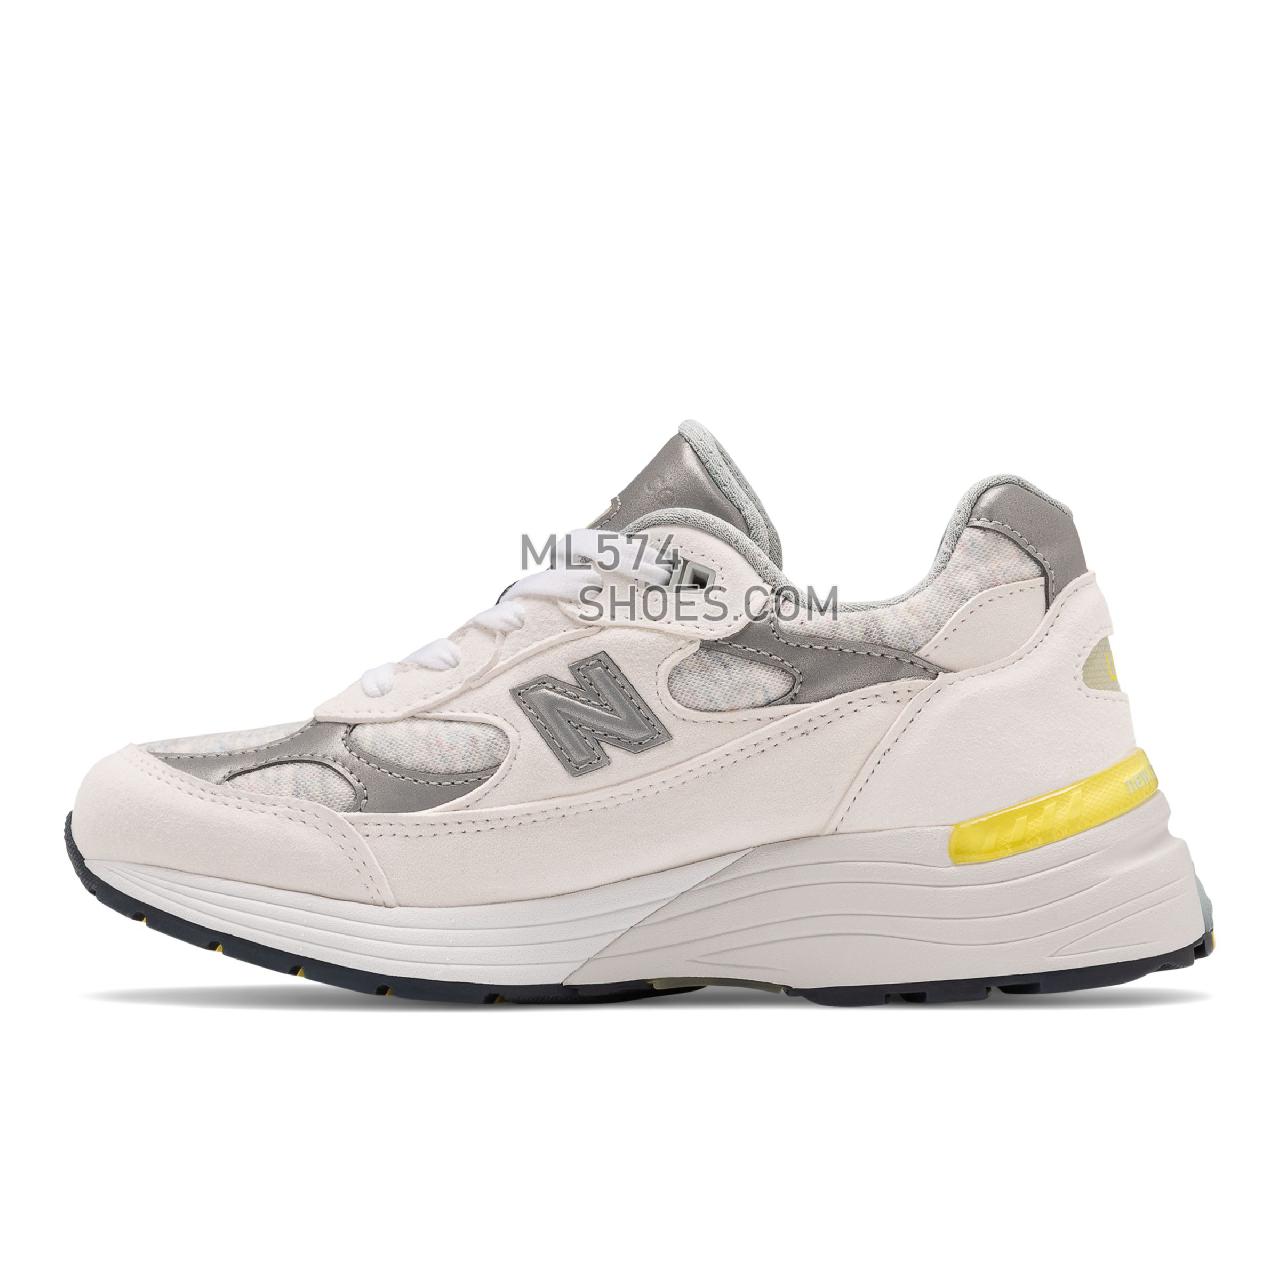 New Balance Made in USA 992 - Women's Made in USA And UK Sneakers - White with Cyclone - W992FC